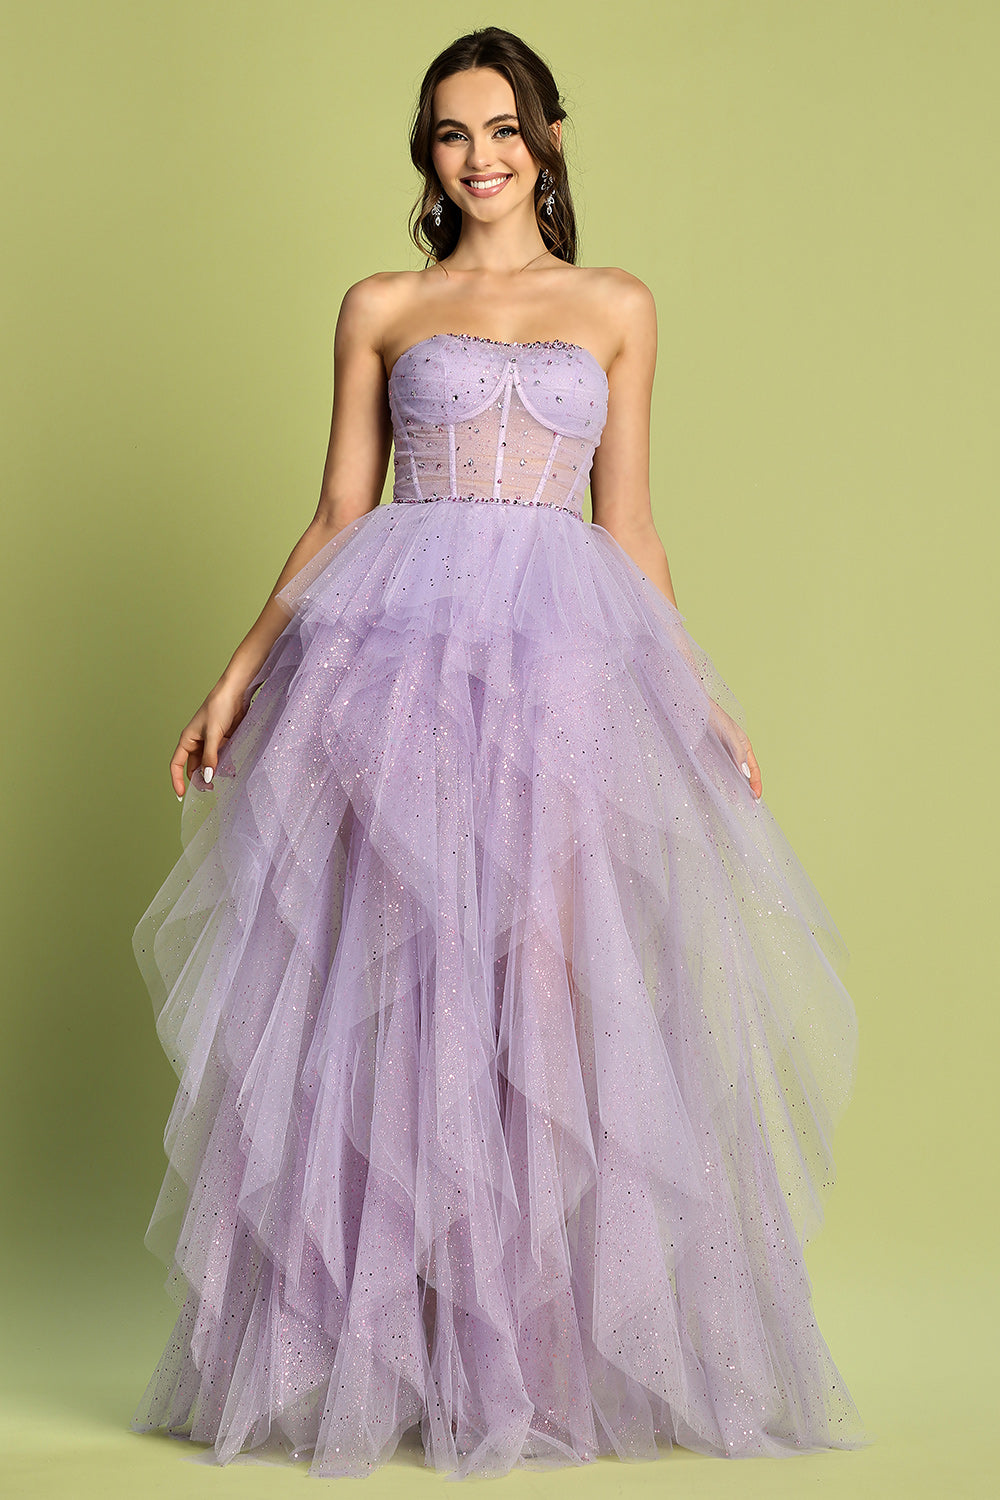 Glitter Strapless Ruffled Layered A-line Slit Gown by Adora 3210